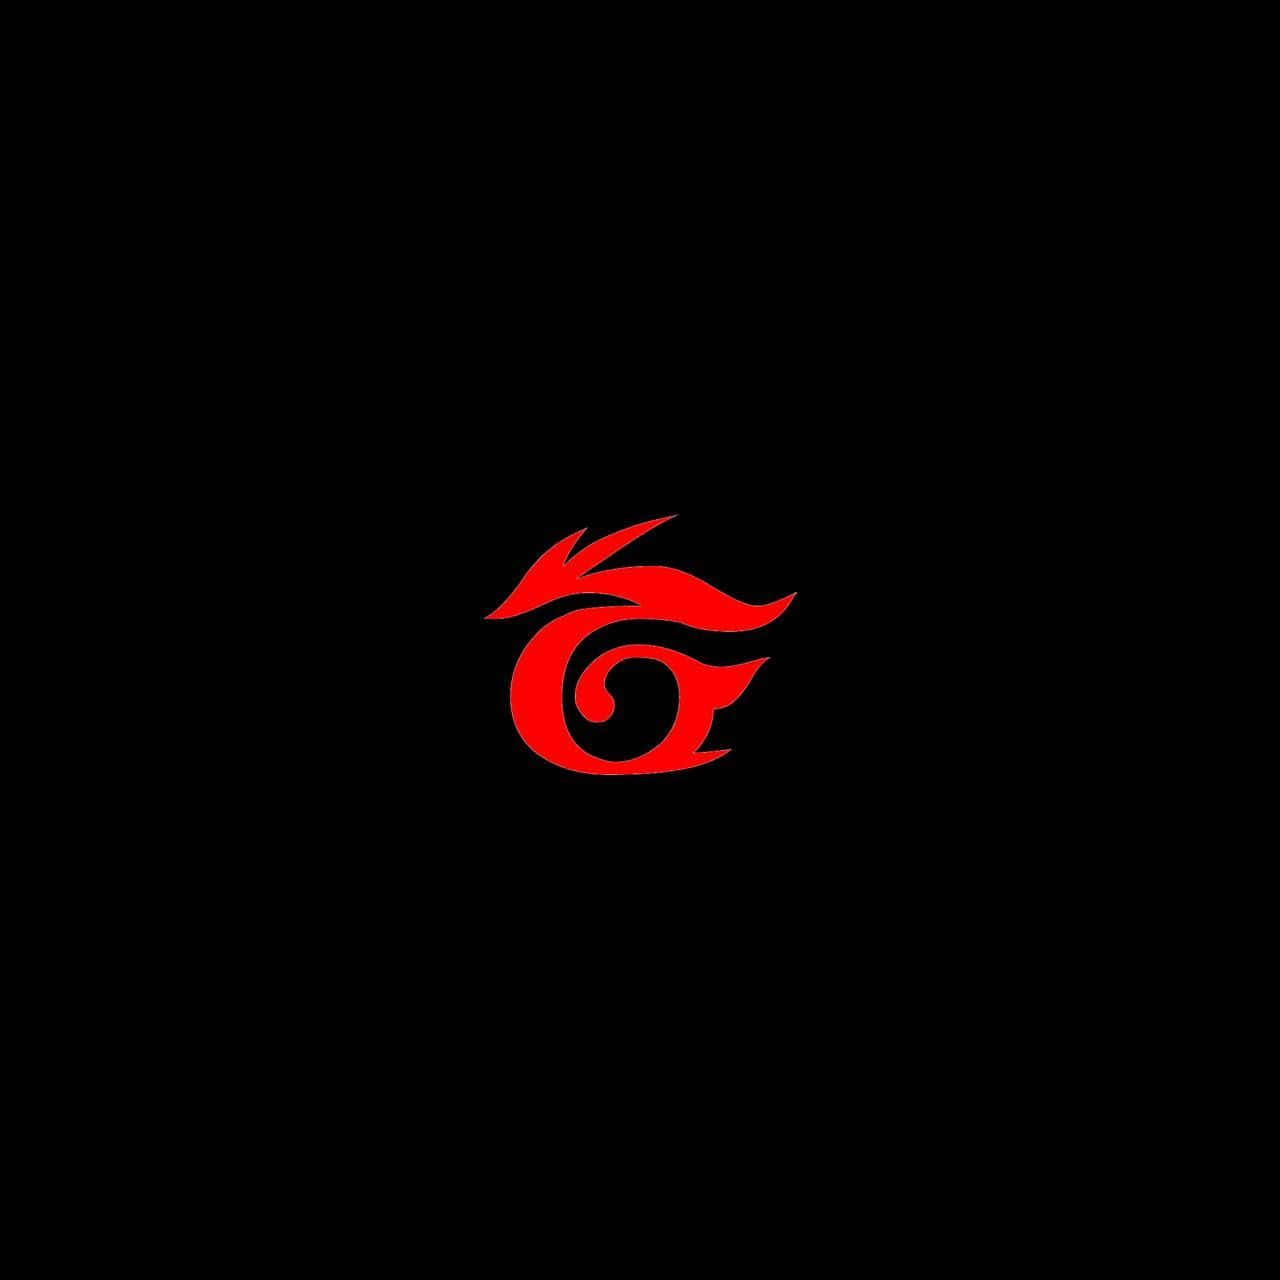 A Red Dragon Logo On A Black Background